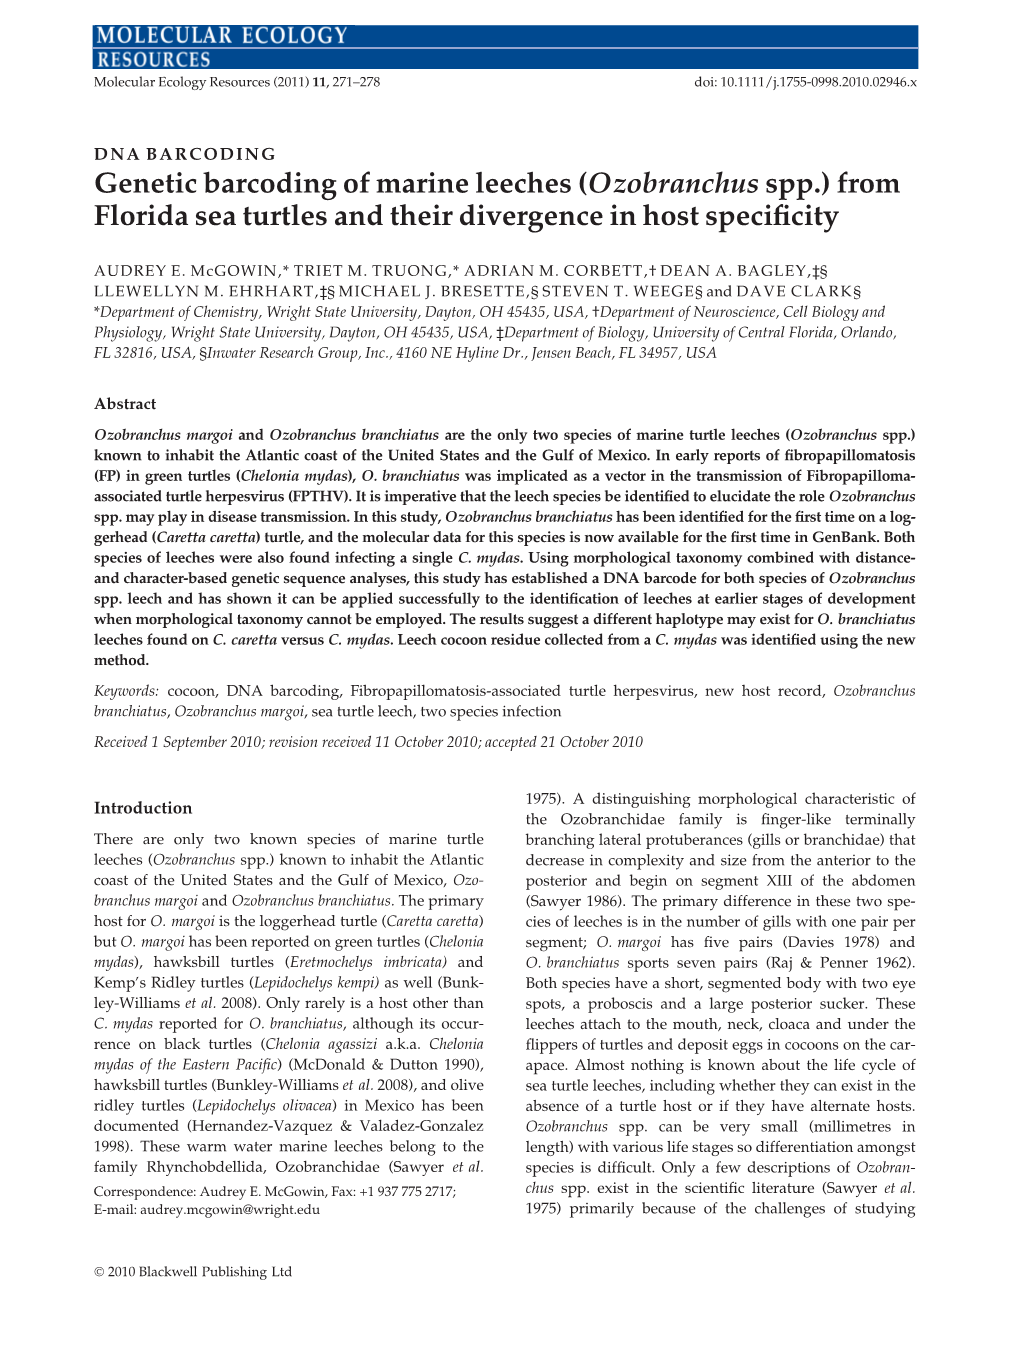 Genetic Barcoding of Marine Leeches (Ozobranchus Spp.) from Florida Sea Turtles and Their Divergence in Host Speciﬁcity